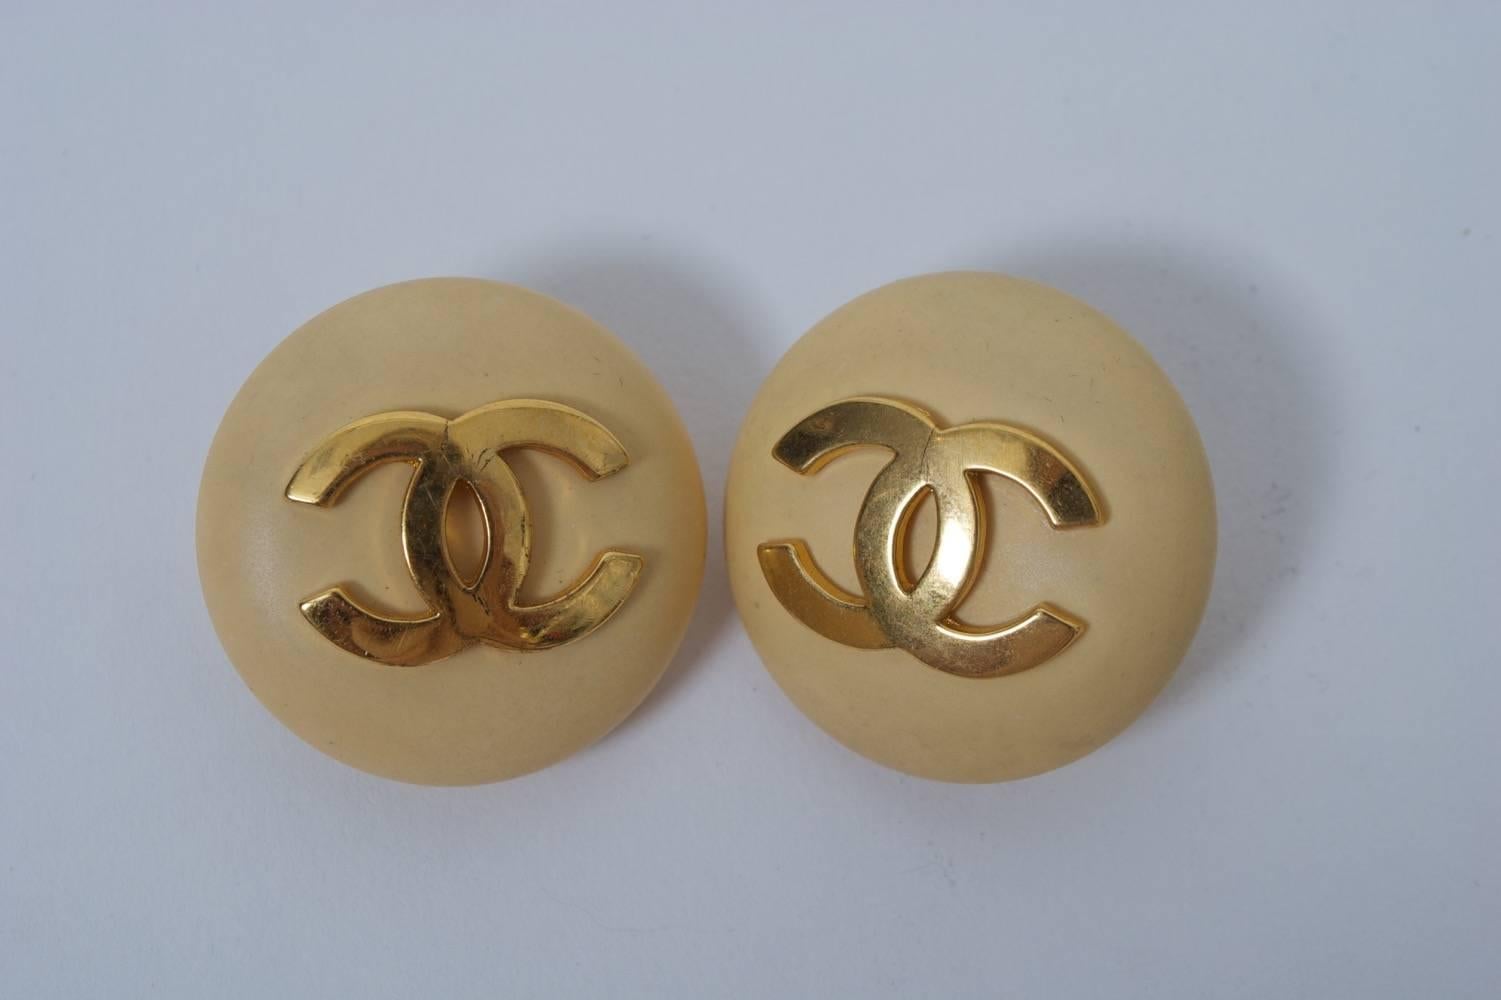 Classic Chanel button earrings in beige plastic or resin with double-C logo in gold metal. Clip backs with oval identity plaque dating design to 1987.